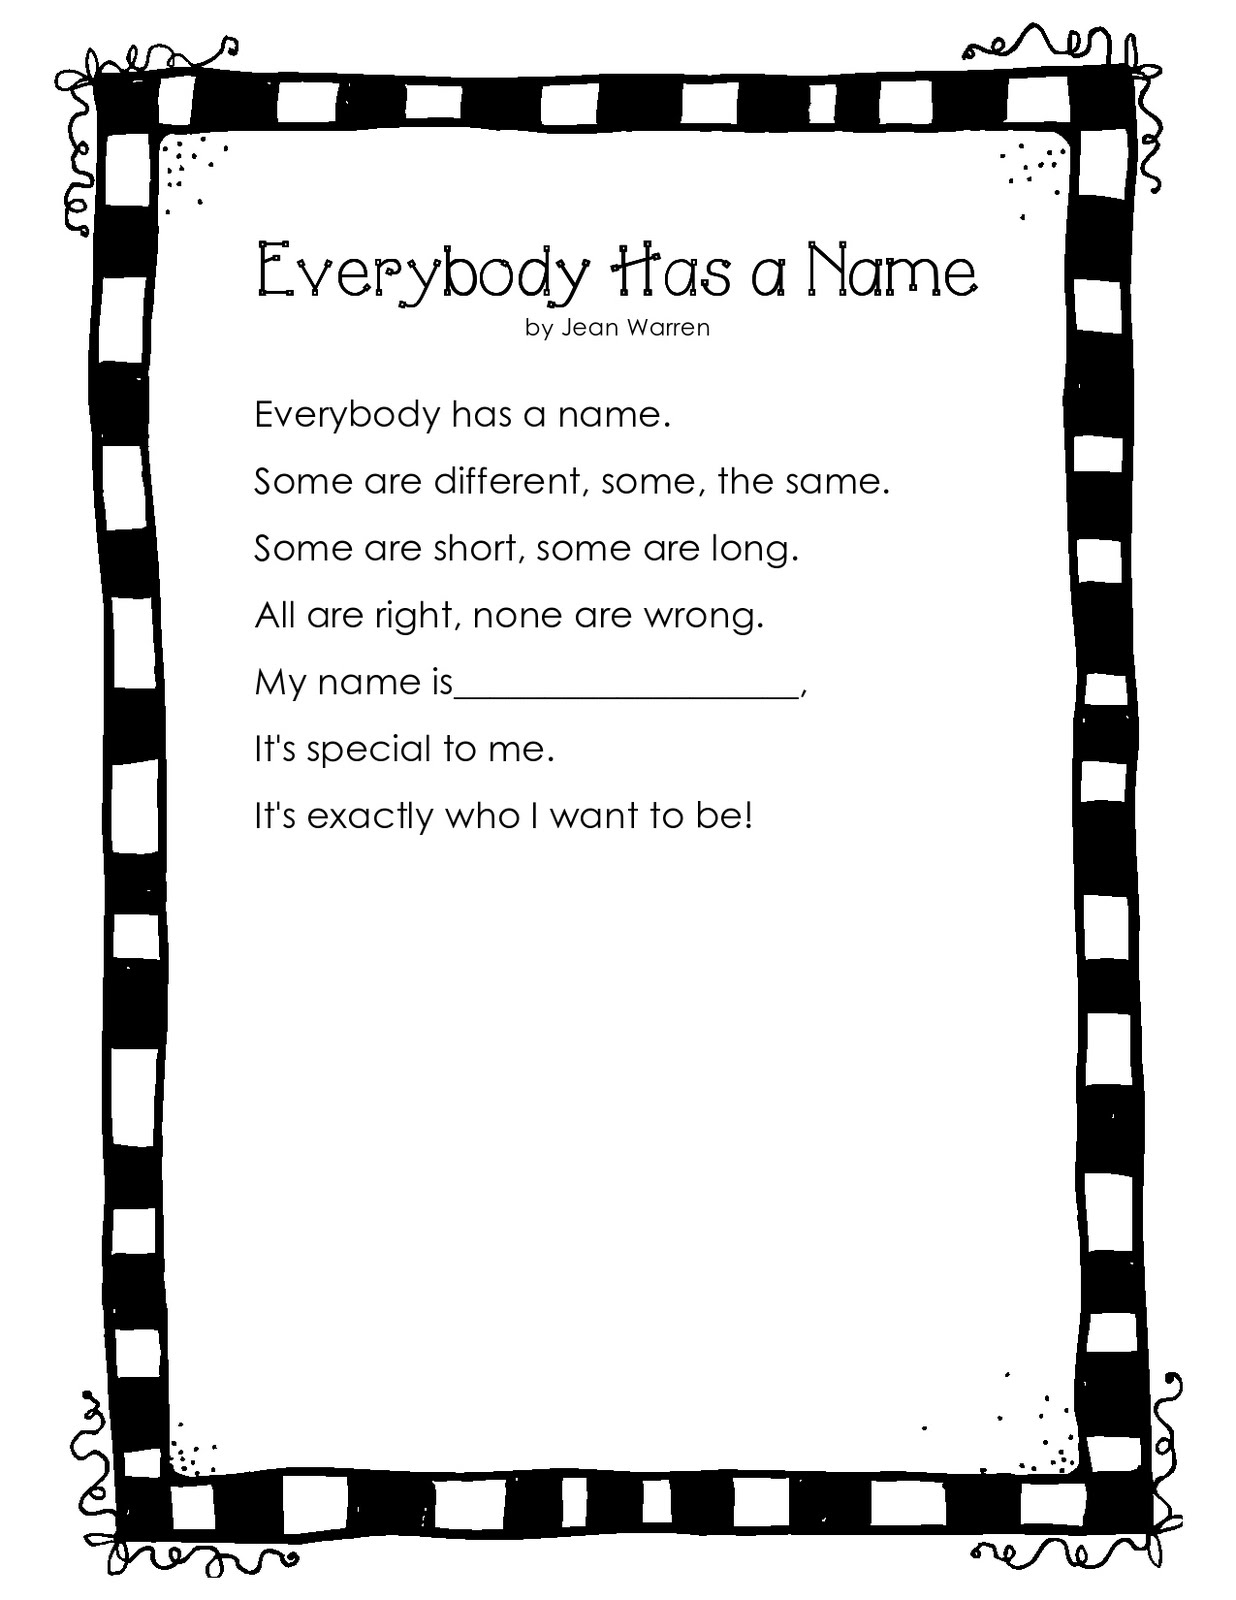 Kids can draw and color a self-portrait at the bottom of this poem ...